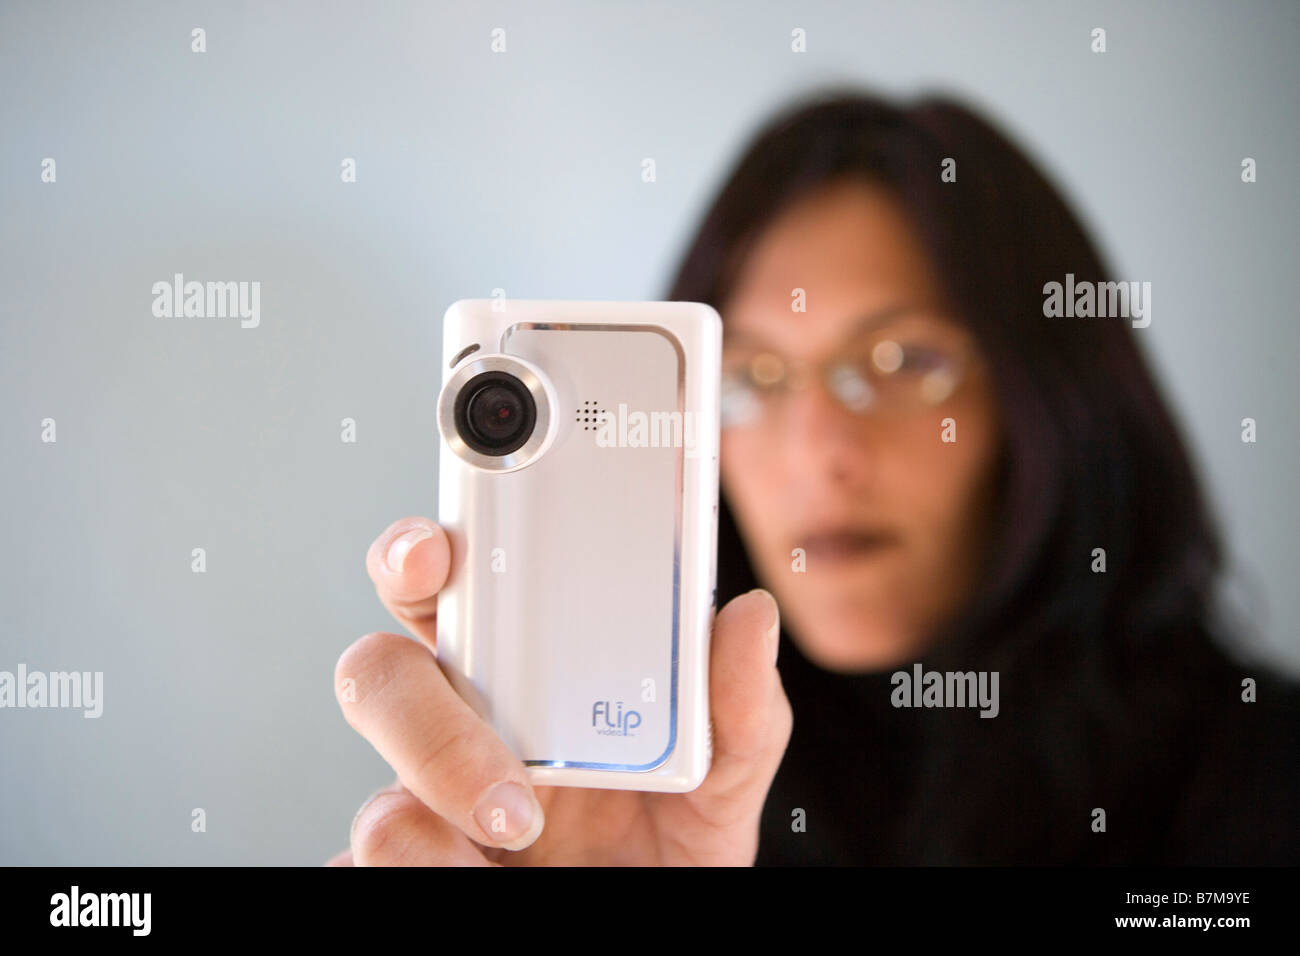 woman in mid thirties video taping using a small flip video camera, closeup shot Stock Photo